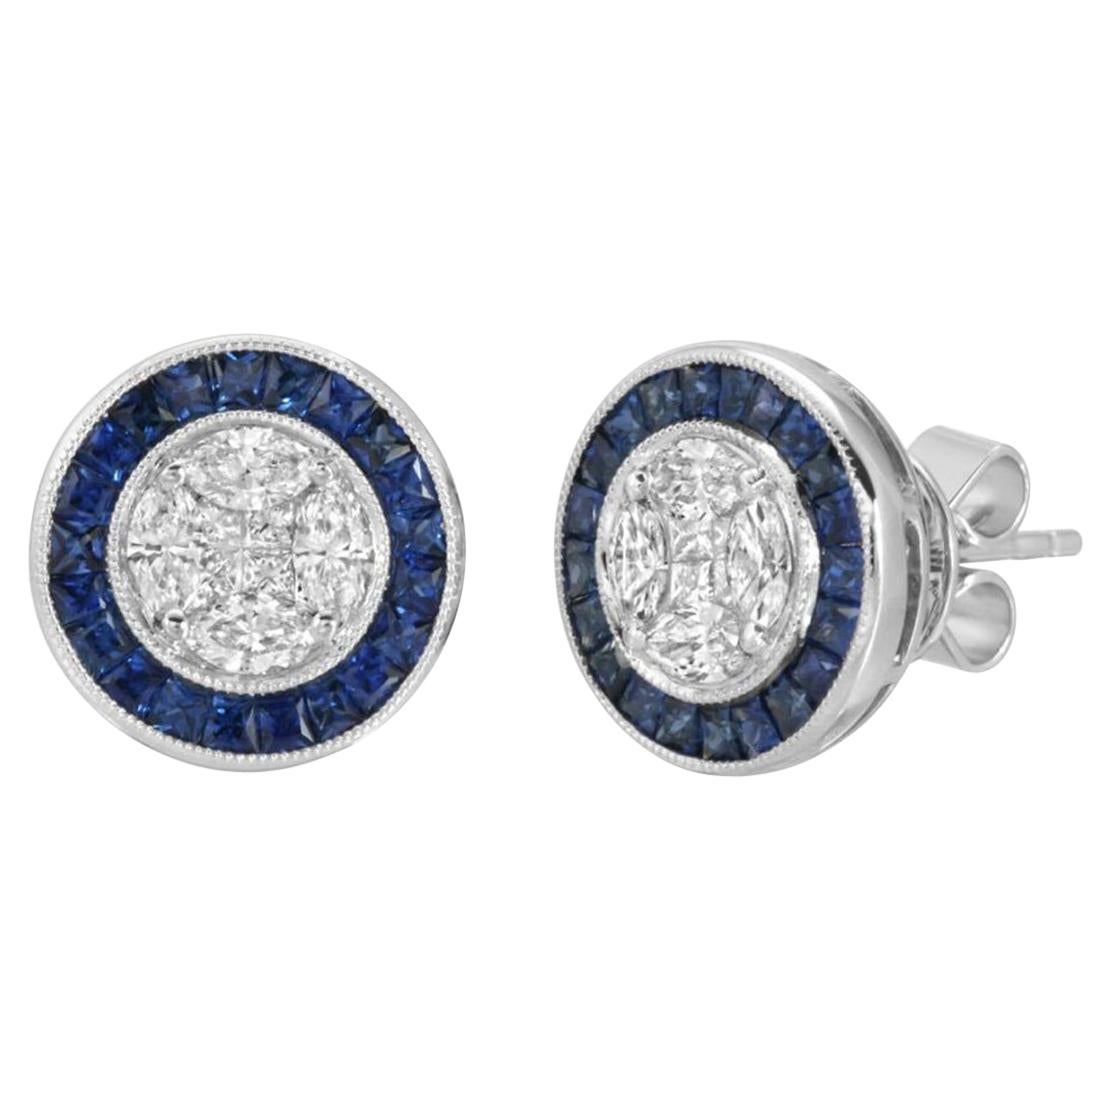 1.09 CT Natural Blue Sapphire & 0.89 CT Diamonds18K White Gold Stud Earrings For Sale